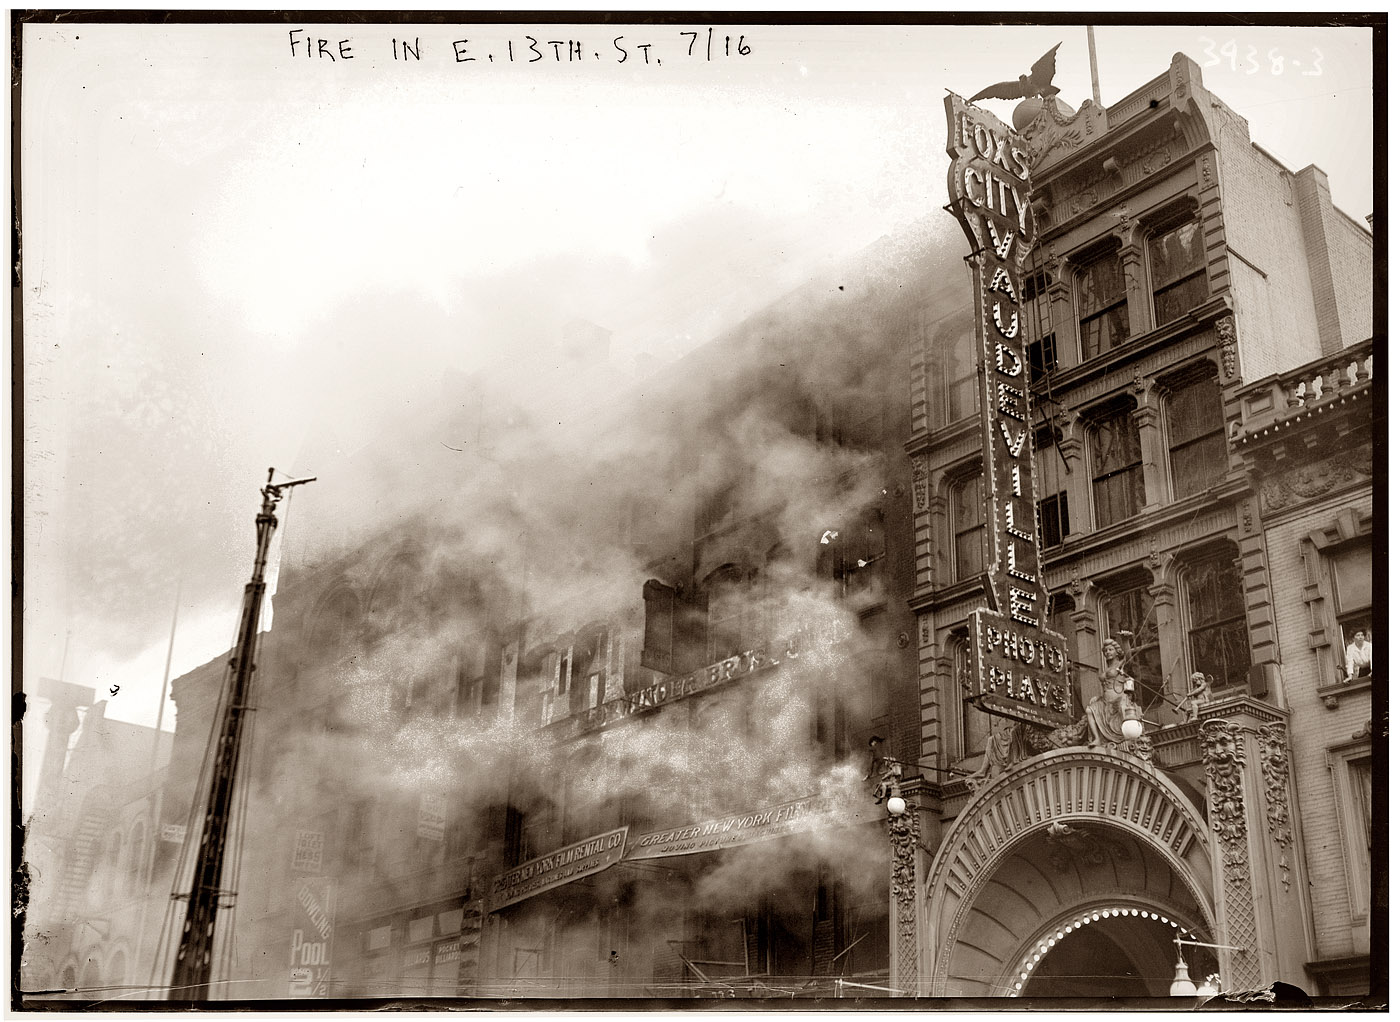 June 29, 1916, fire at the Fox Playhouse between East 13th and 14th Streets. Tenants in the building owned by restaurateur August Luchow included the vaudeville house (showing "photo plays"), Loewinger Brothers printers, a pool hall and Greater New York Film Rental. We also see women at two of the windows. View full size. 5x7 glass negative, George Grantham Bain Collection.